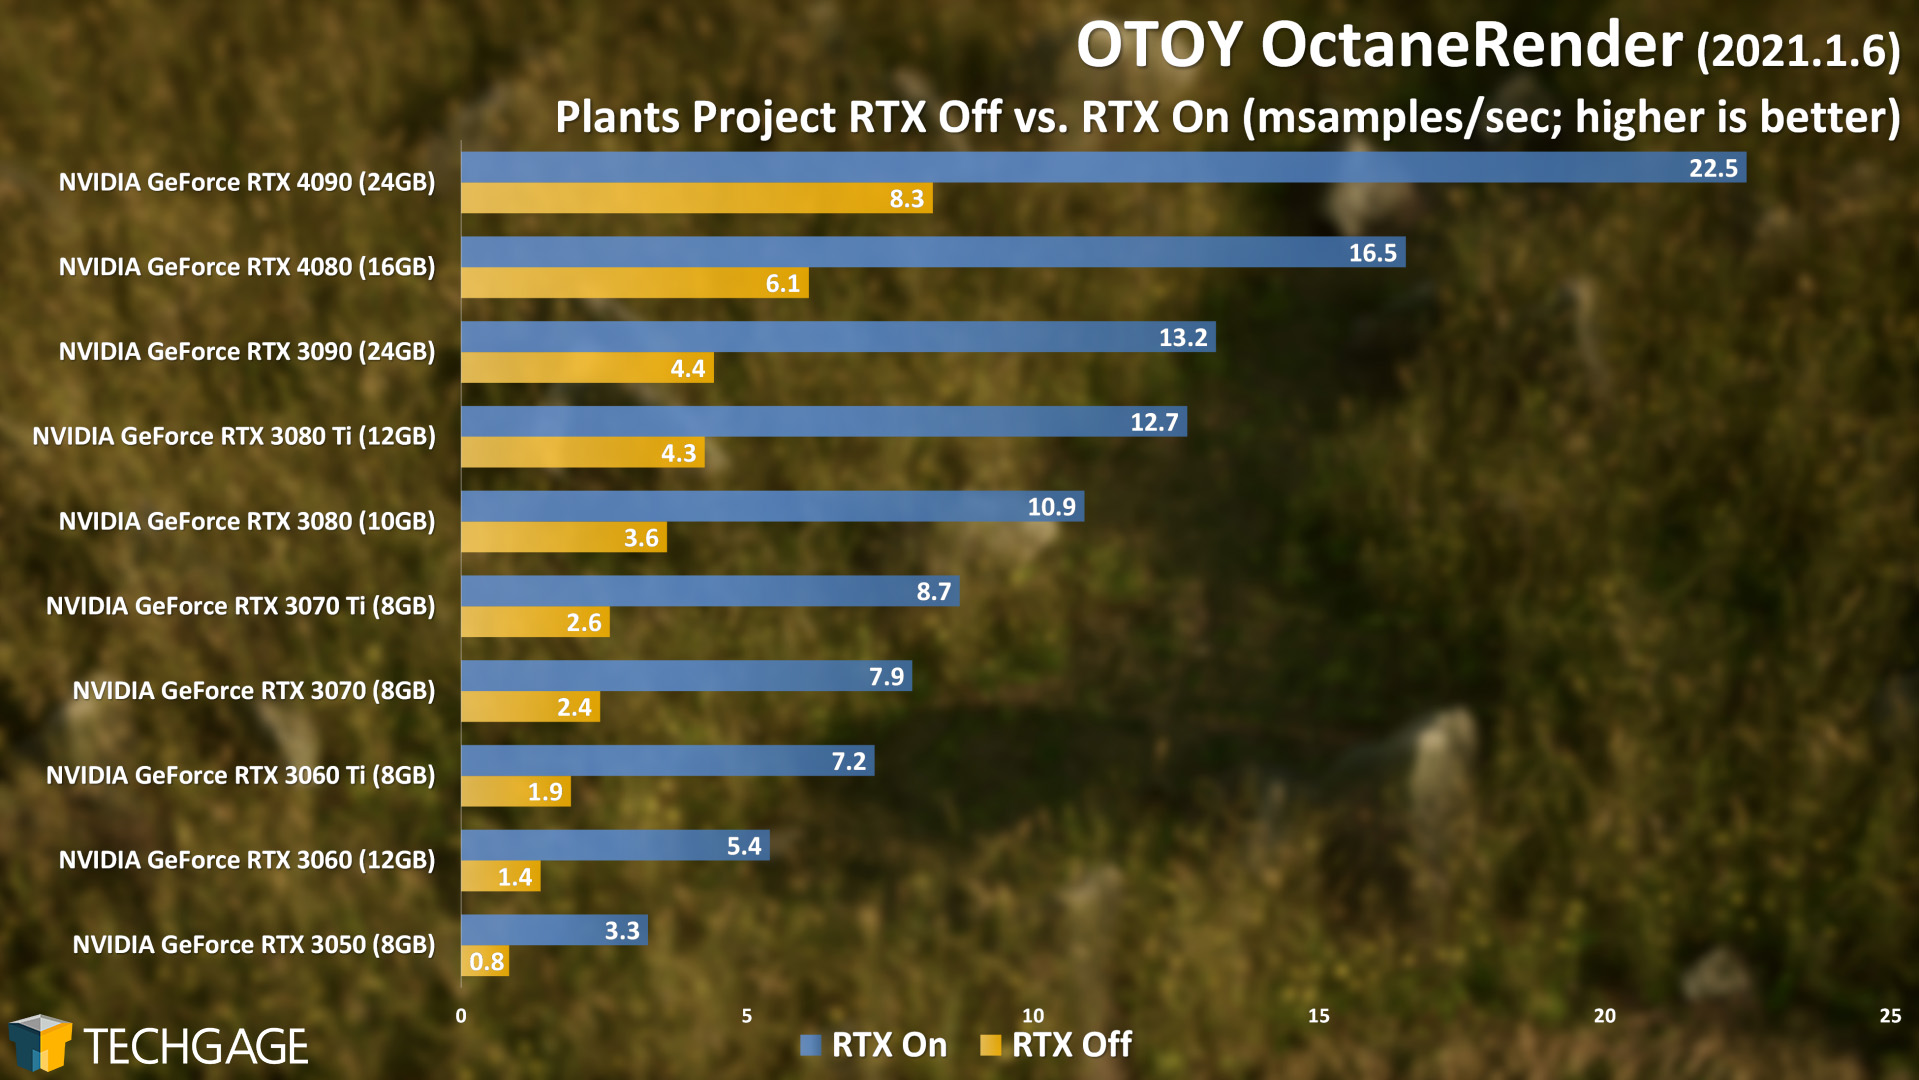 OTOY OctaneRender - Plants RTX On and Off (NVIDIA GeForce RTX 4080)